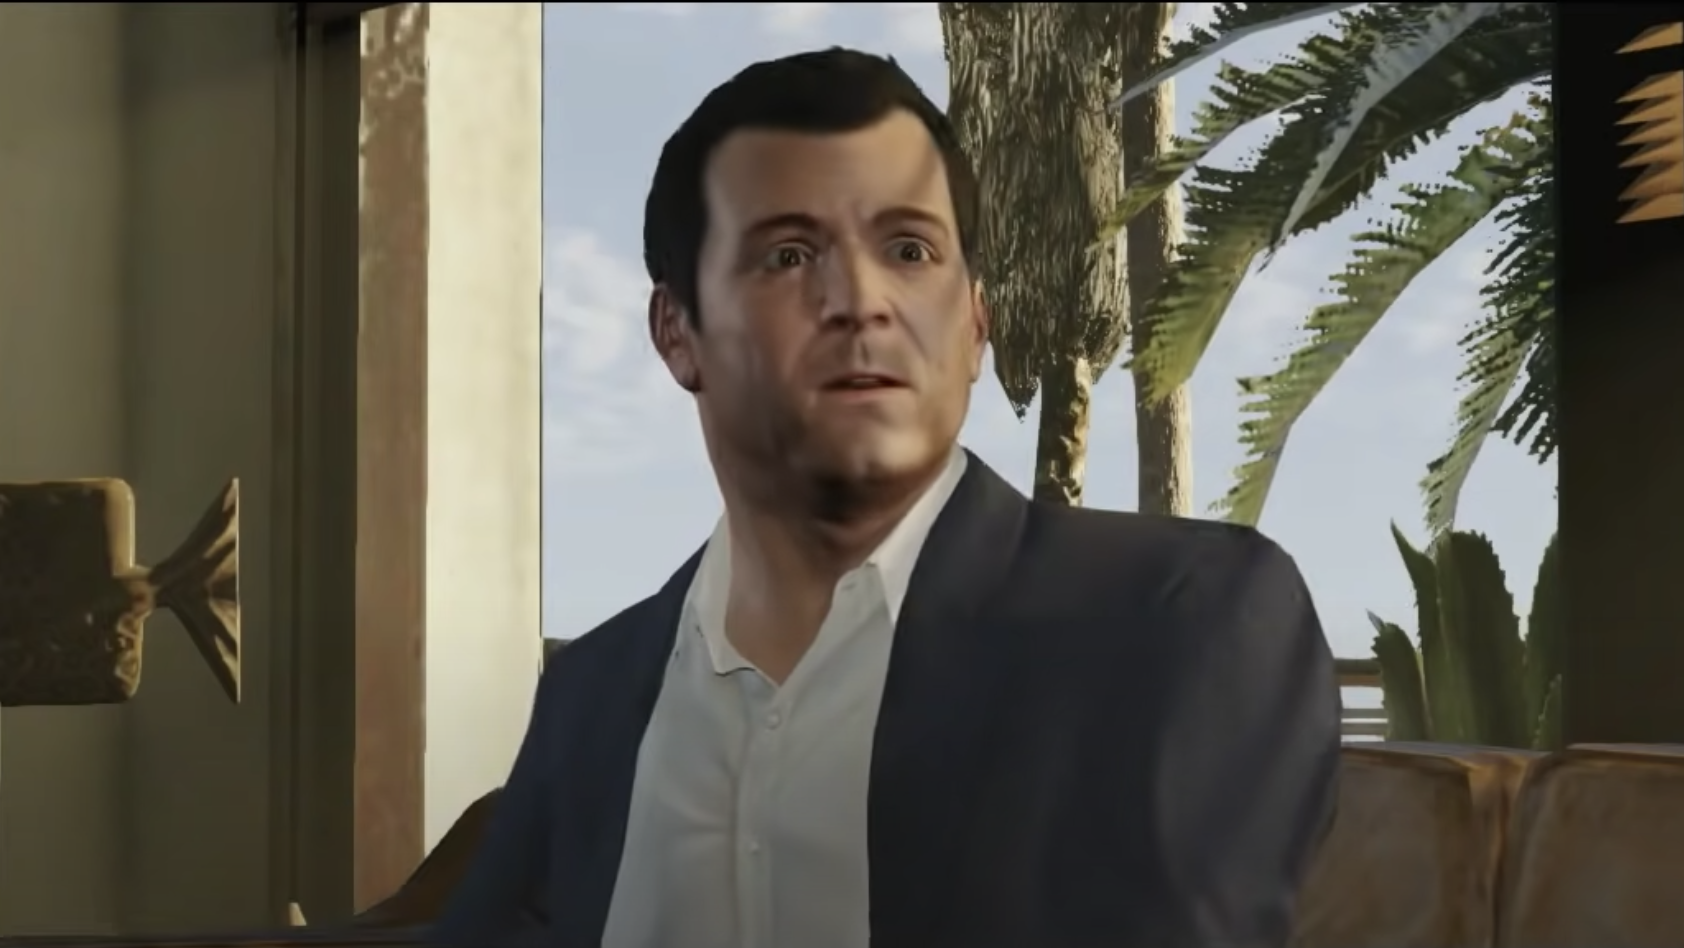 Rockstar “disappointed” with GTA 6 leaks, but development continues